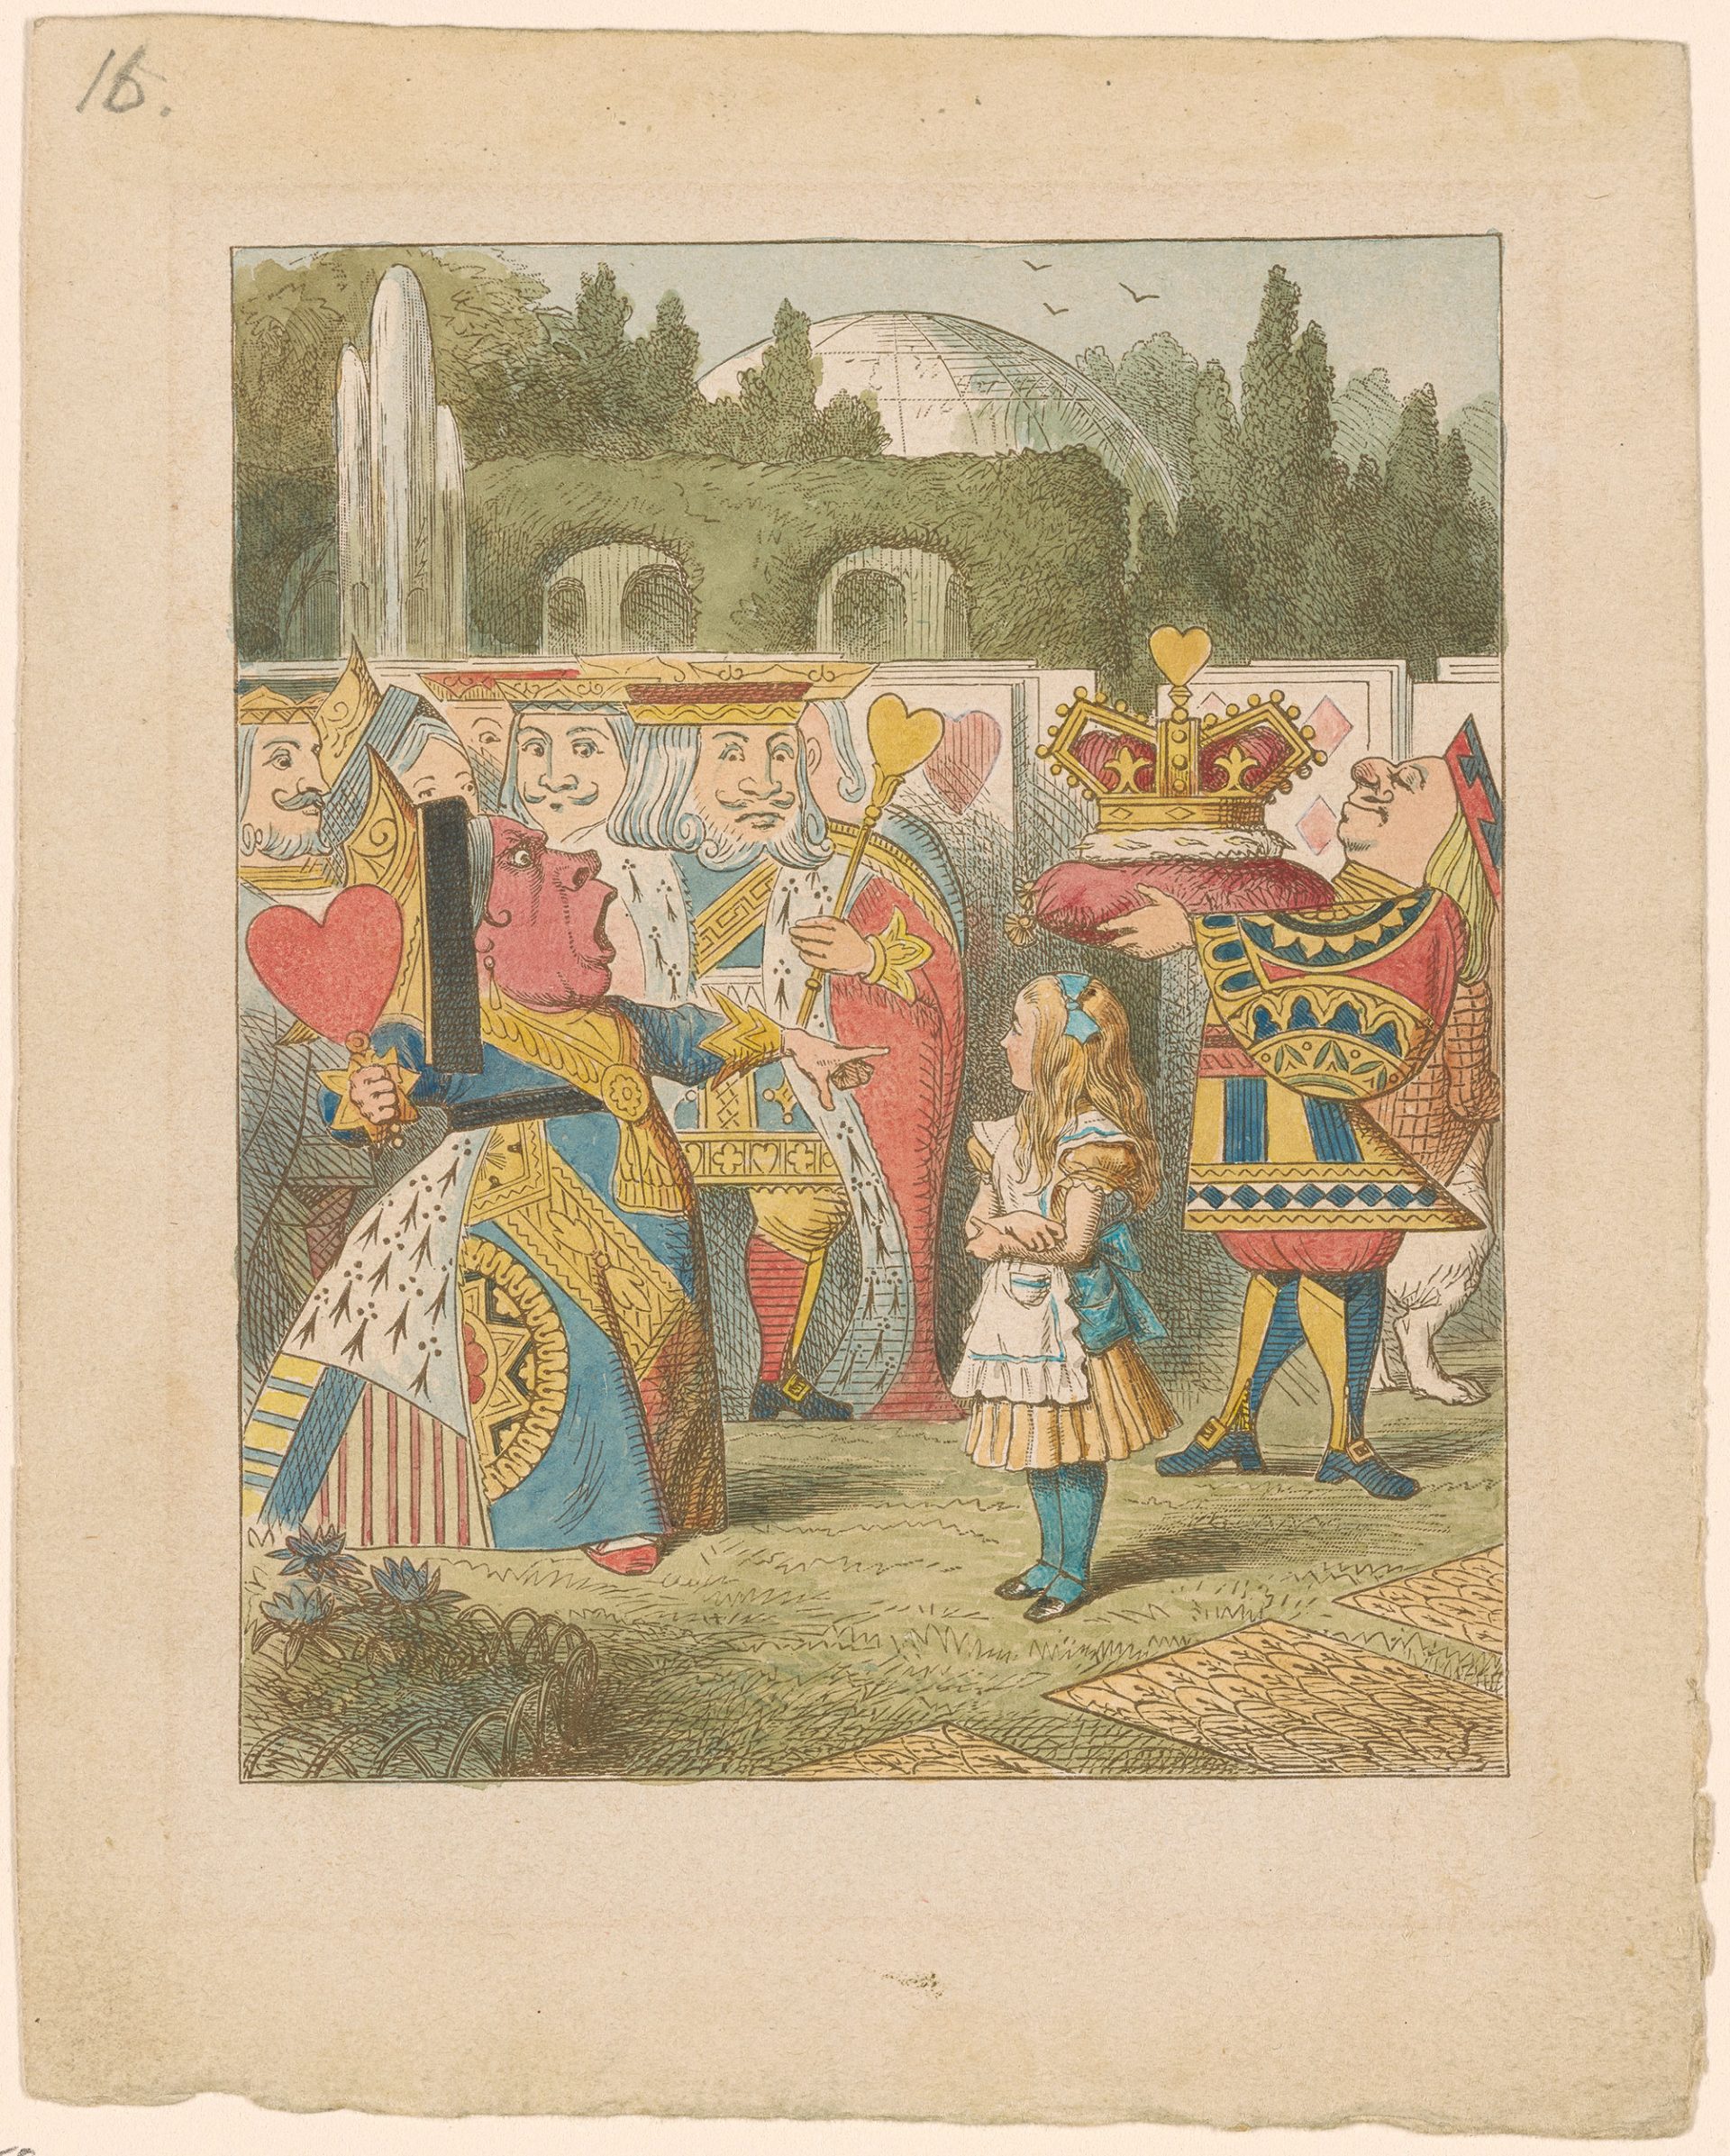 An illustration of a queen with a large red face, pointing and shouting at Alice.